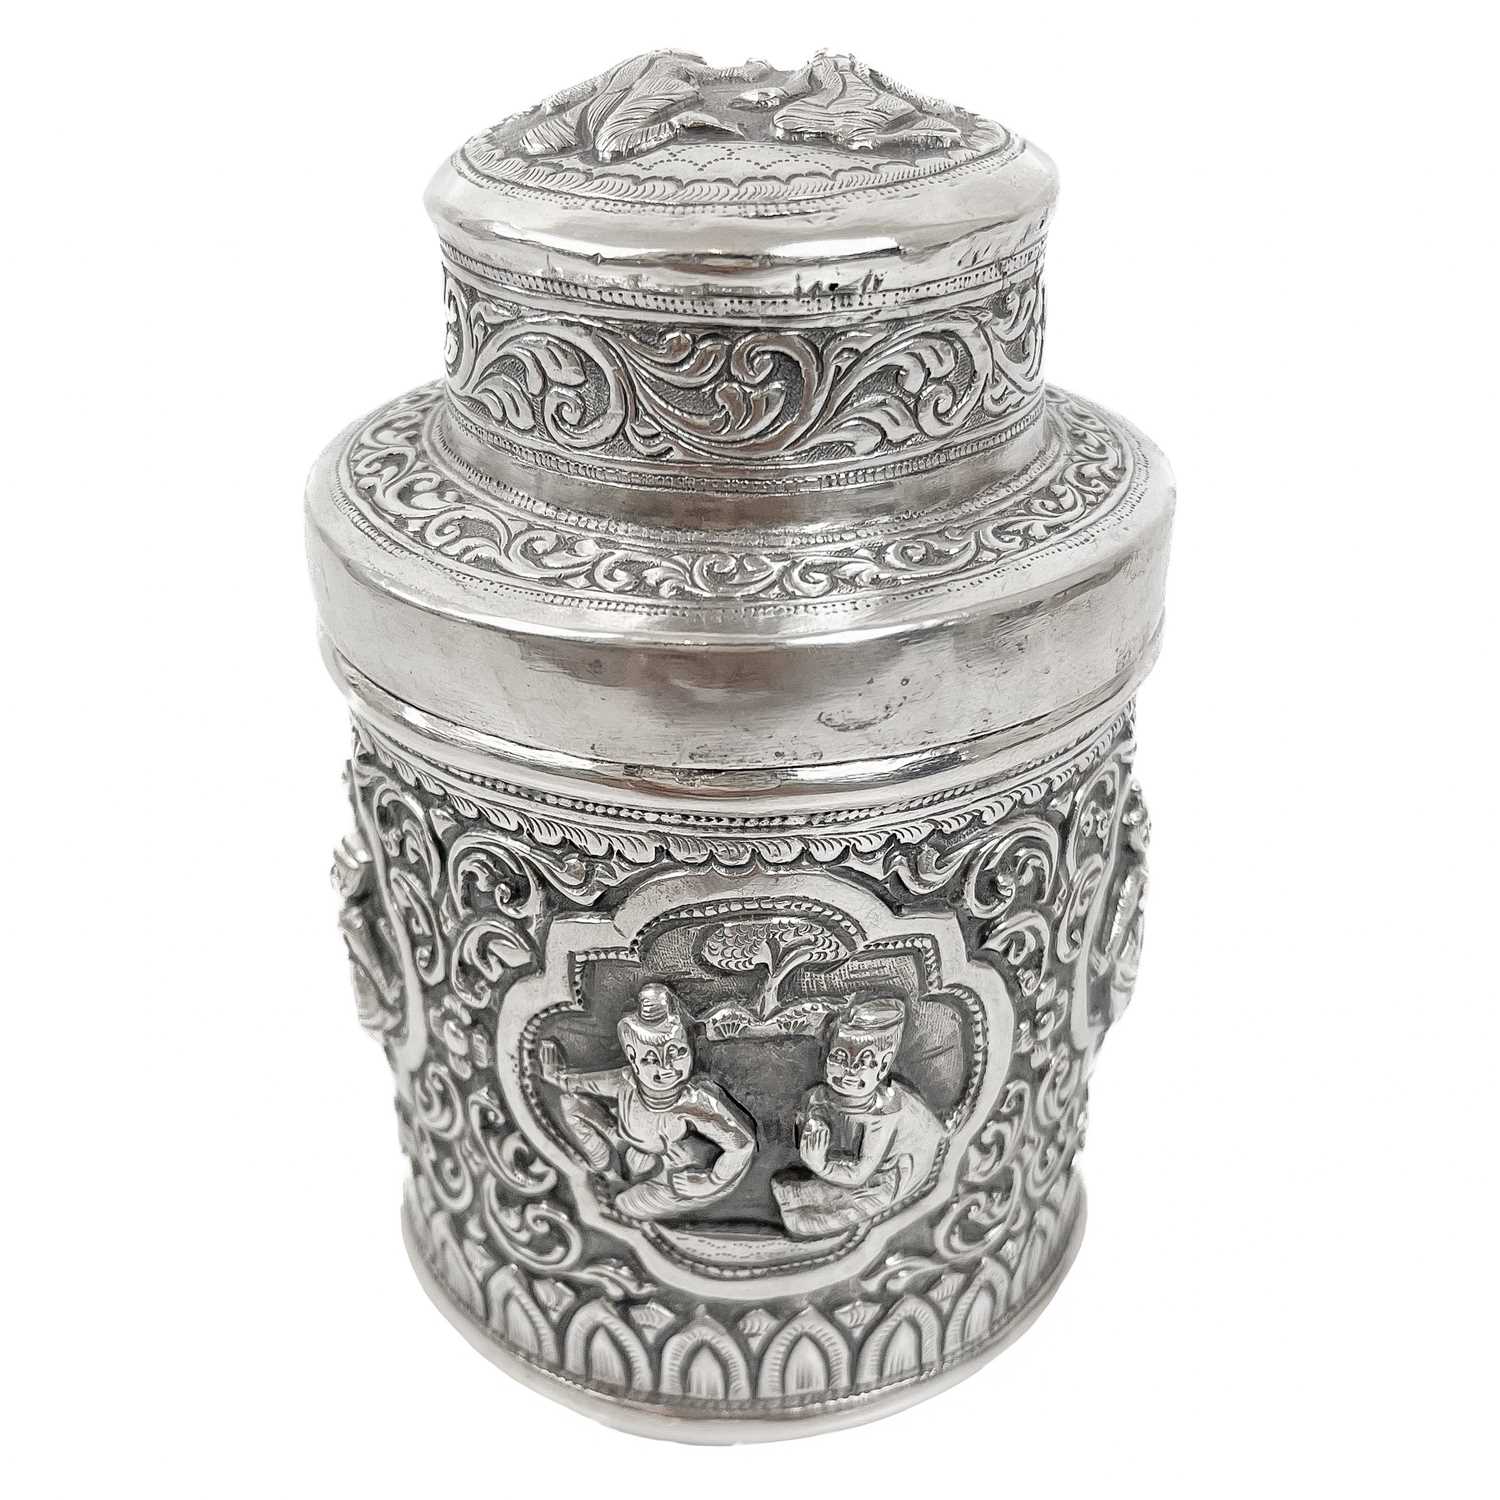 Two Burmese silver lidded cannisters, mid 20th century - Image 12 of 25